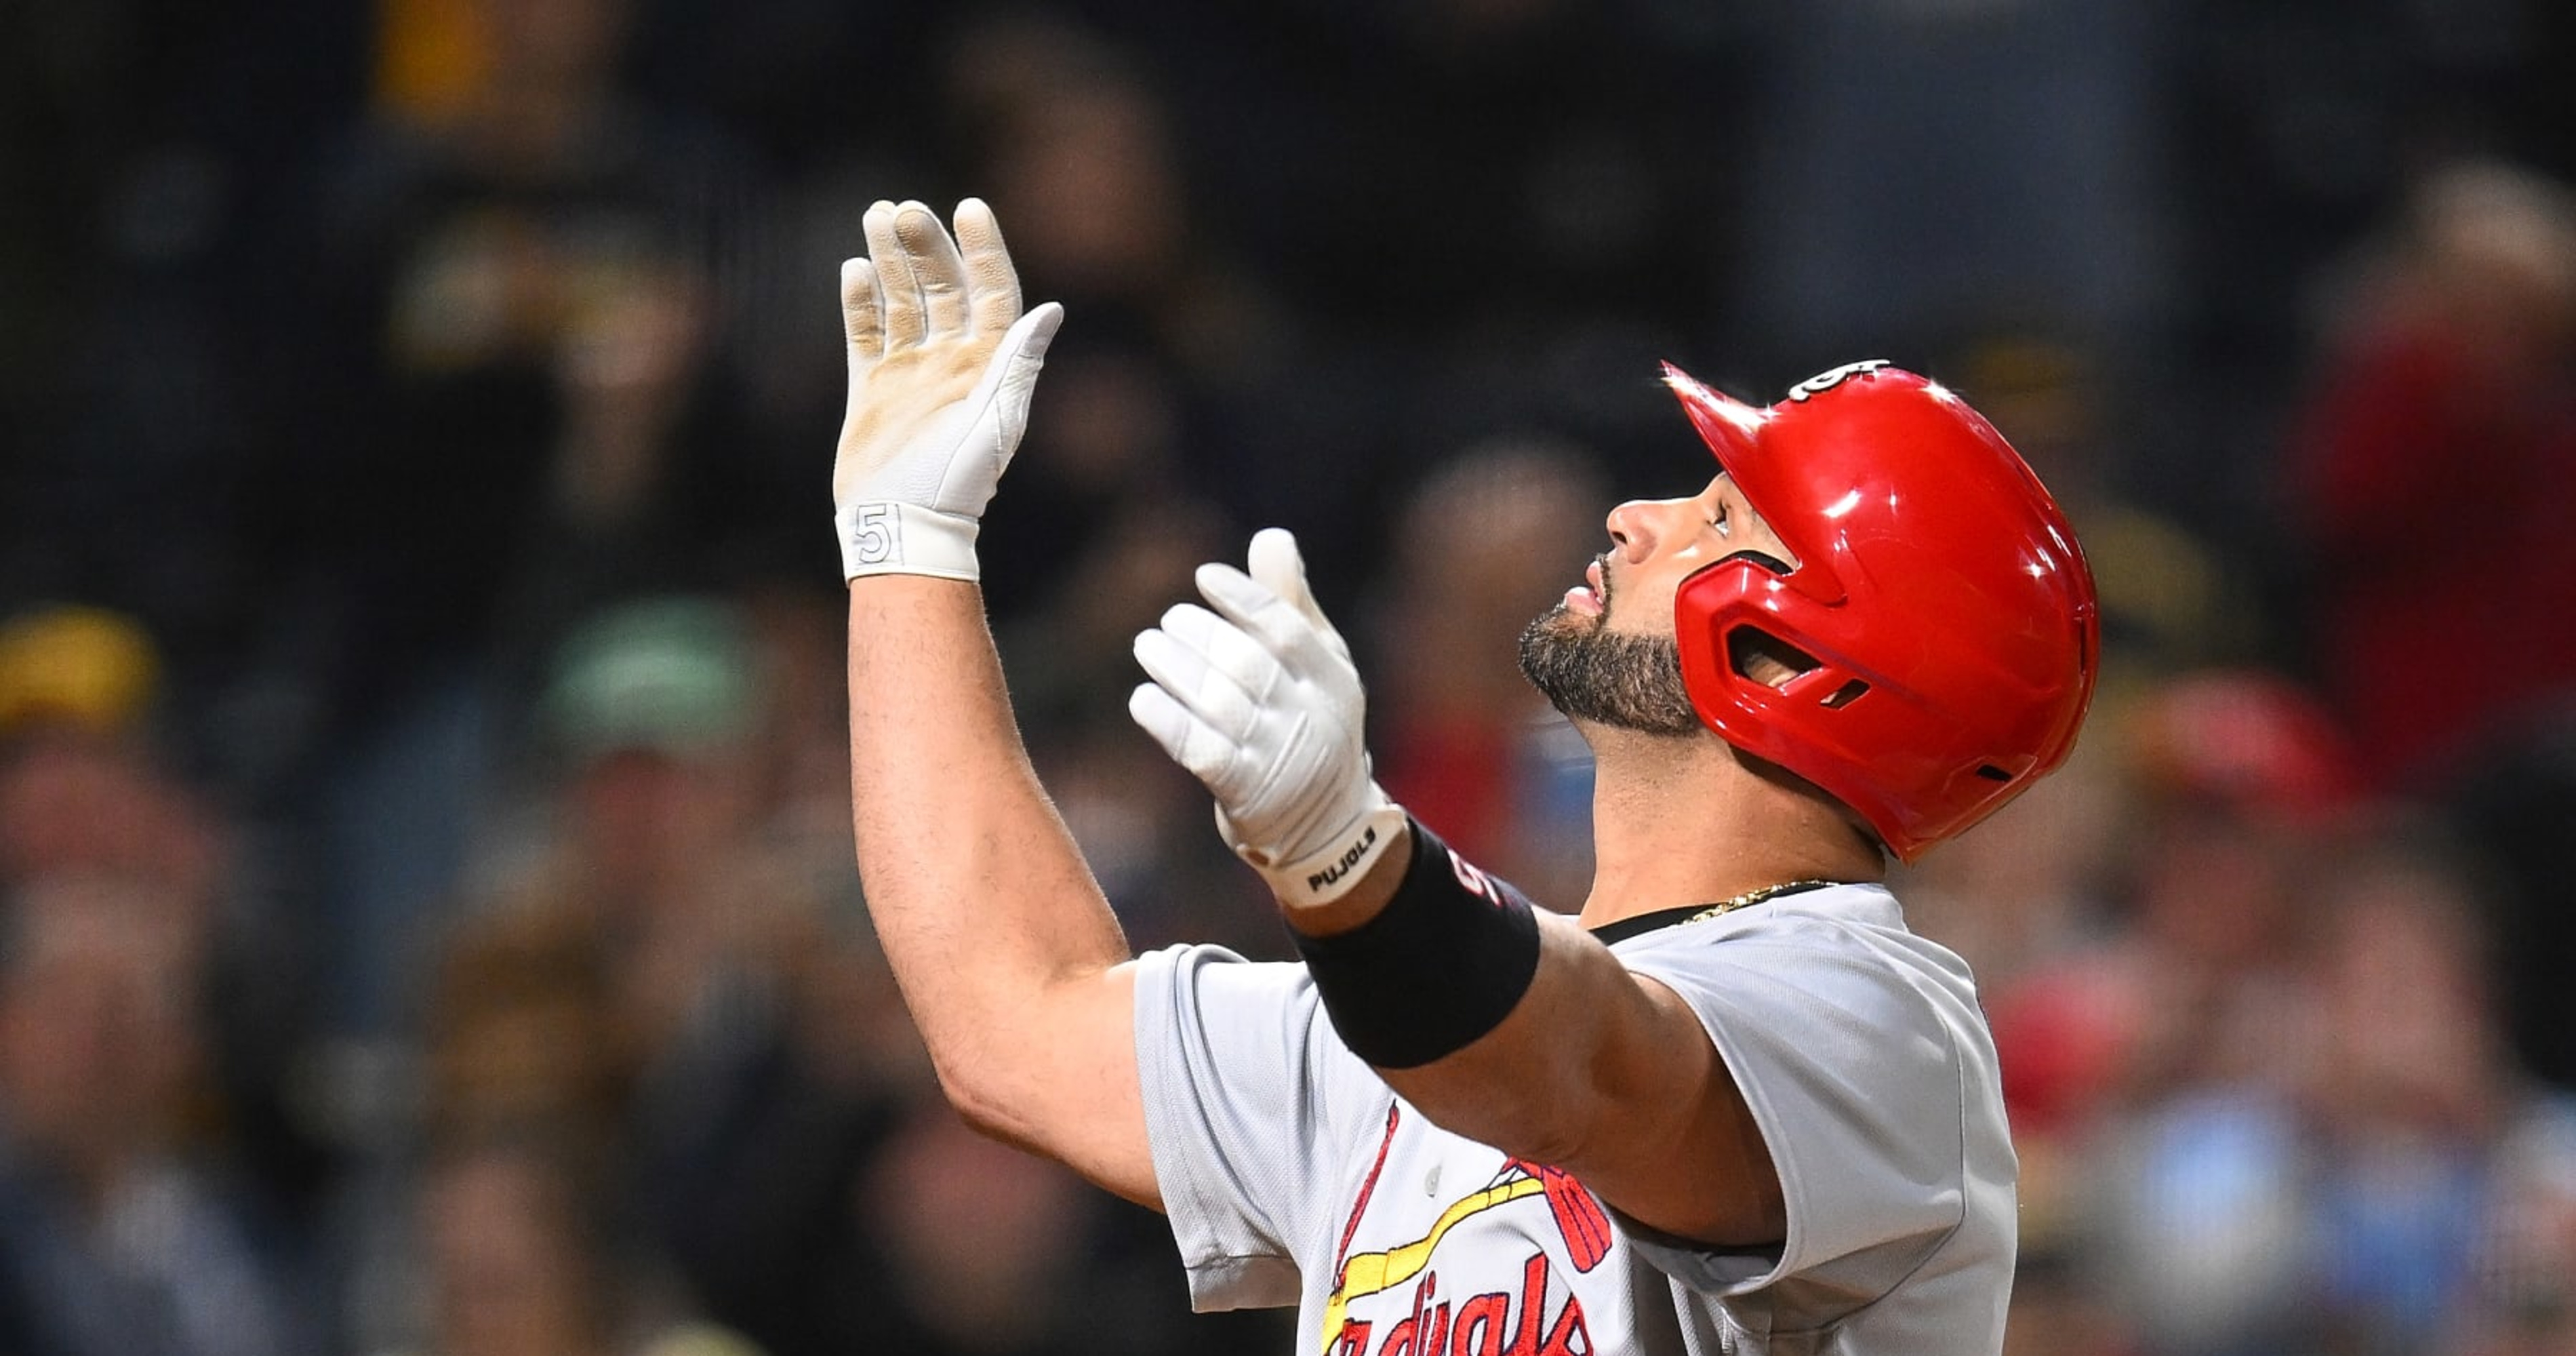 cardinals-albert-pujols-passes-babe-ruth-for-2nd-on-mlb-s-all-time-rbi-list